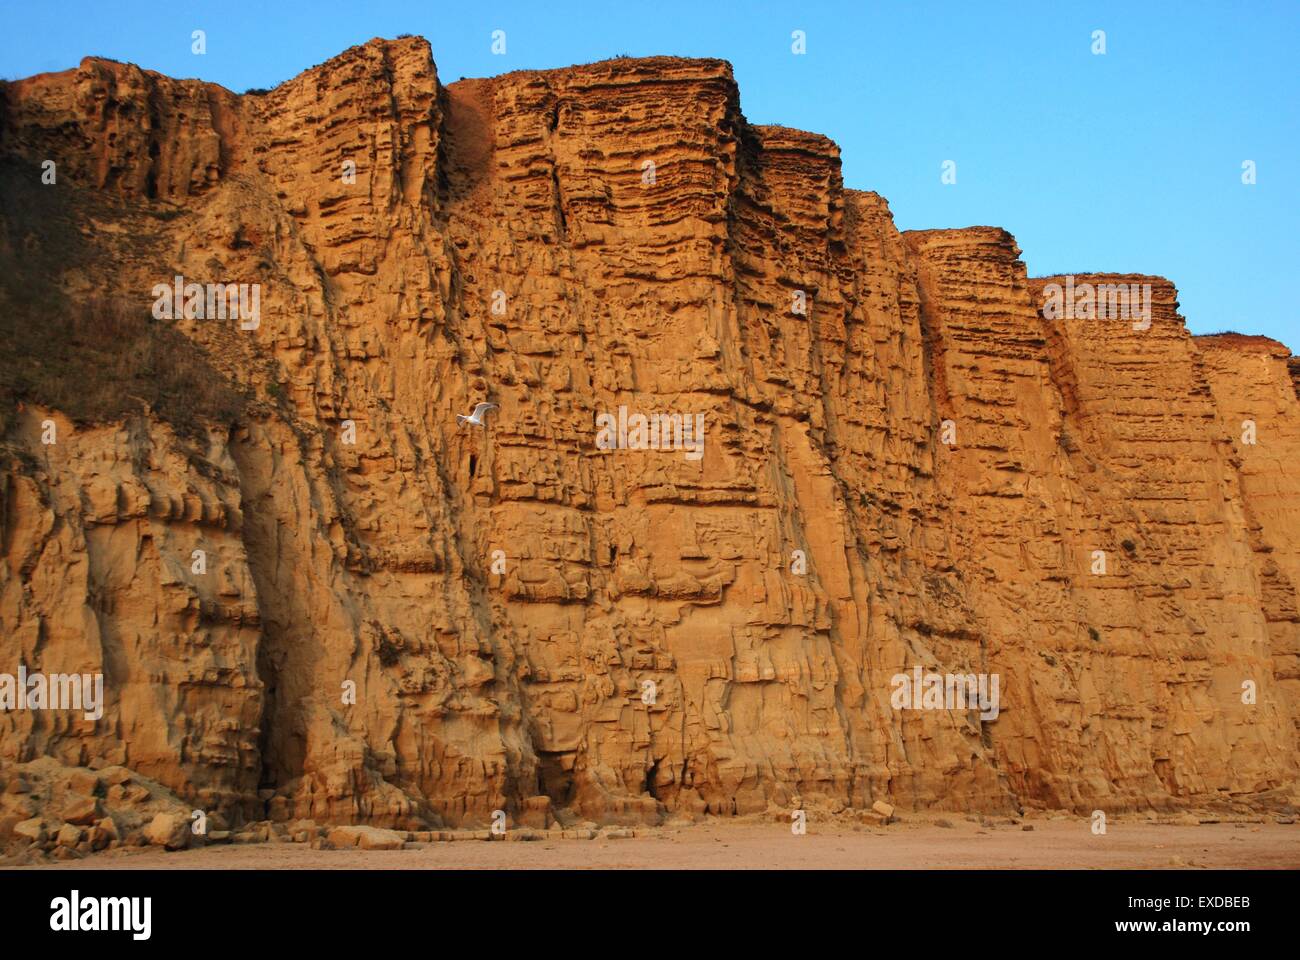 Steep sandstone cliffs of West Bay, Dorset, UK, part of the Jurassic coast of South coast of England. Site of the TV series Broadchuch. Stock Photo